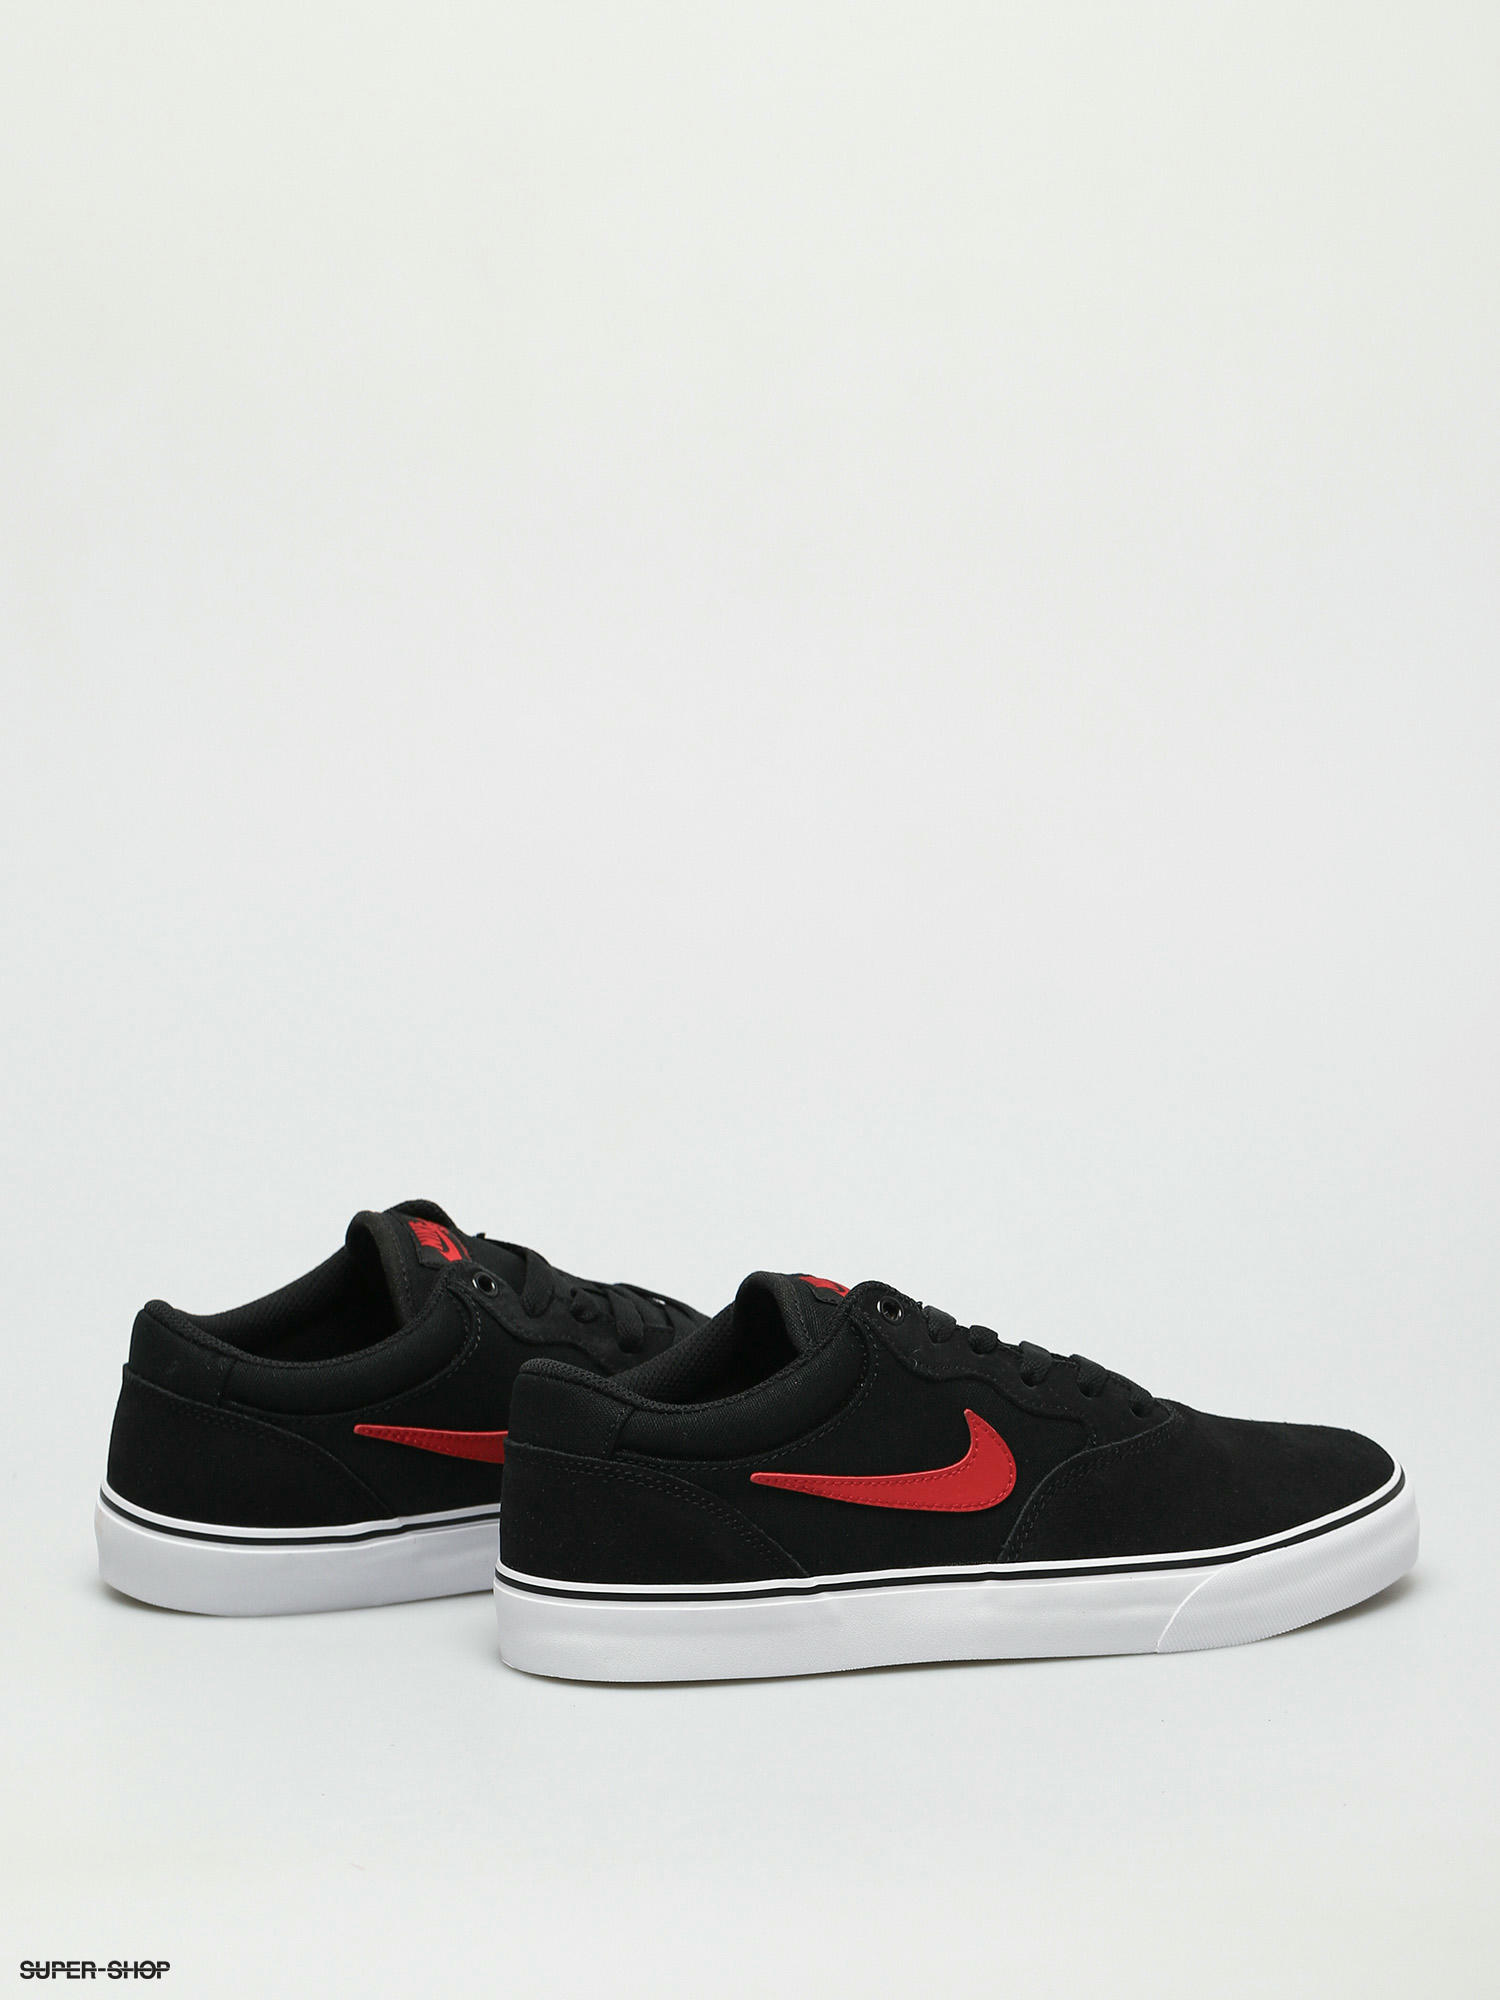 nike sb shoes red and black